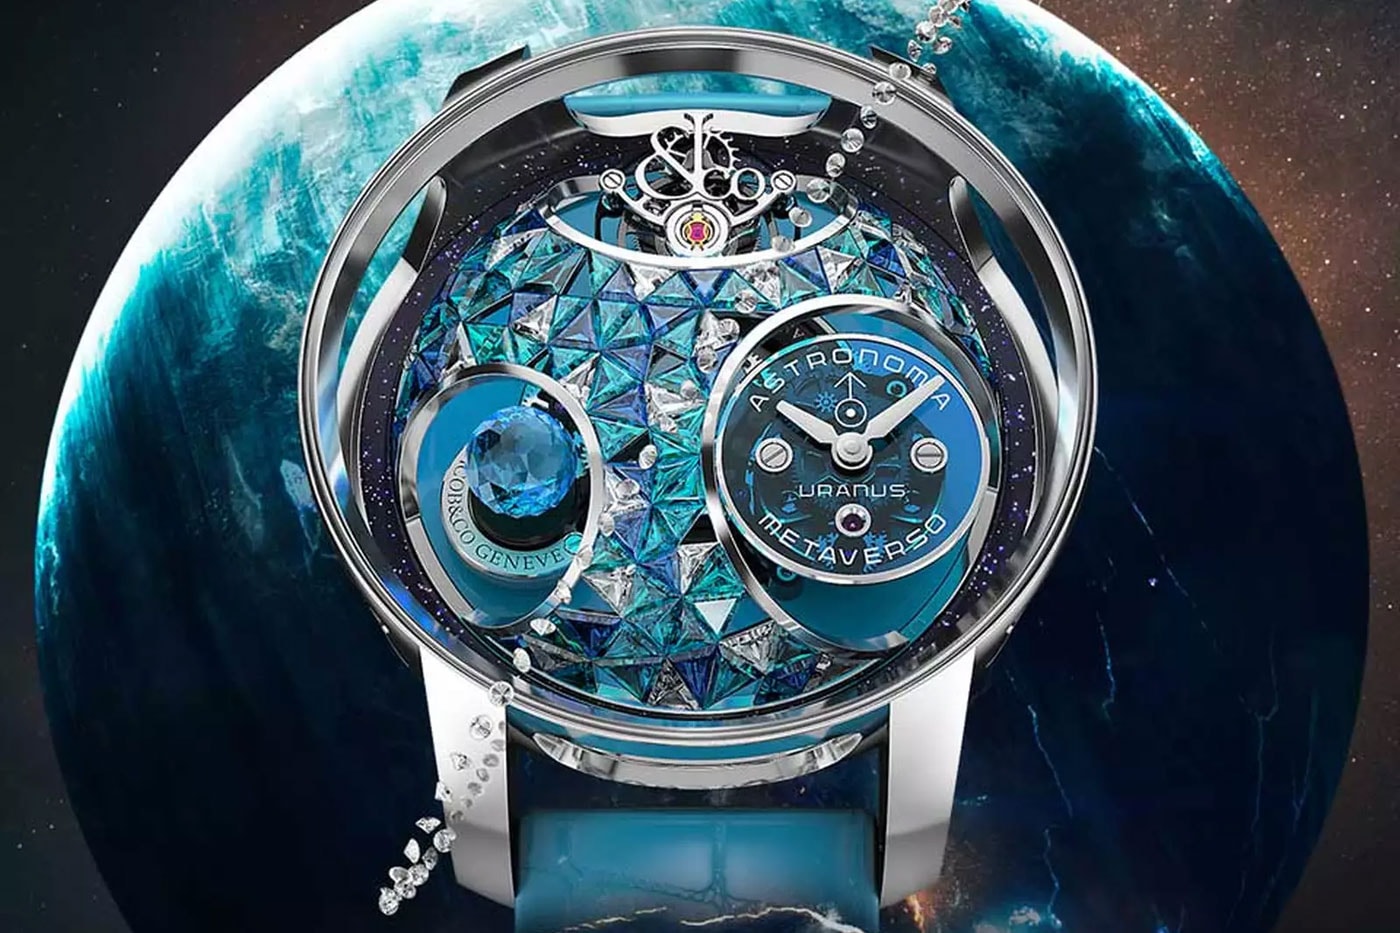 Jacob & Co. Launches Into NFTs With New "Astronomia Metaverso"Collection metaverse ethereum bitcoin binance zodiac signs unxd luxury utility non fungible tokens stars jacab arabo jewelry watches